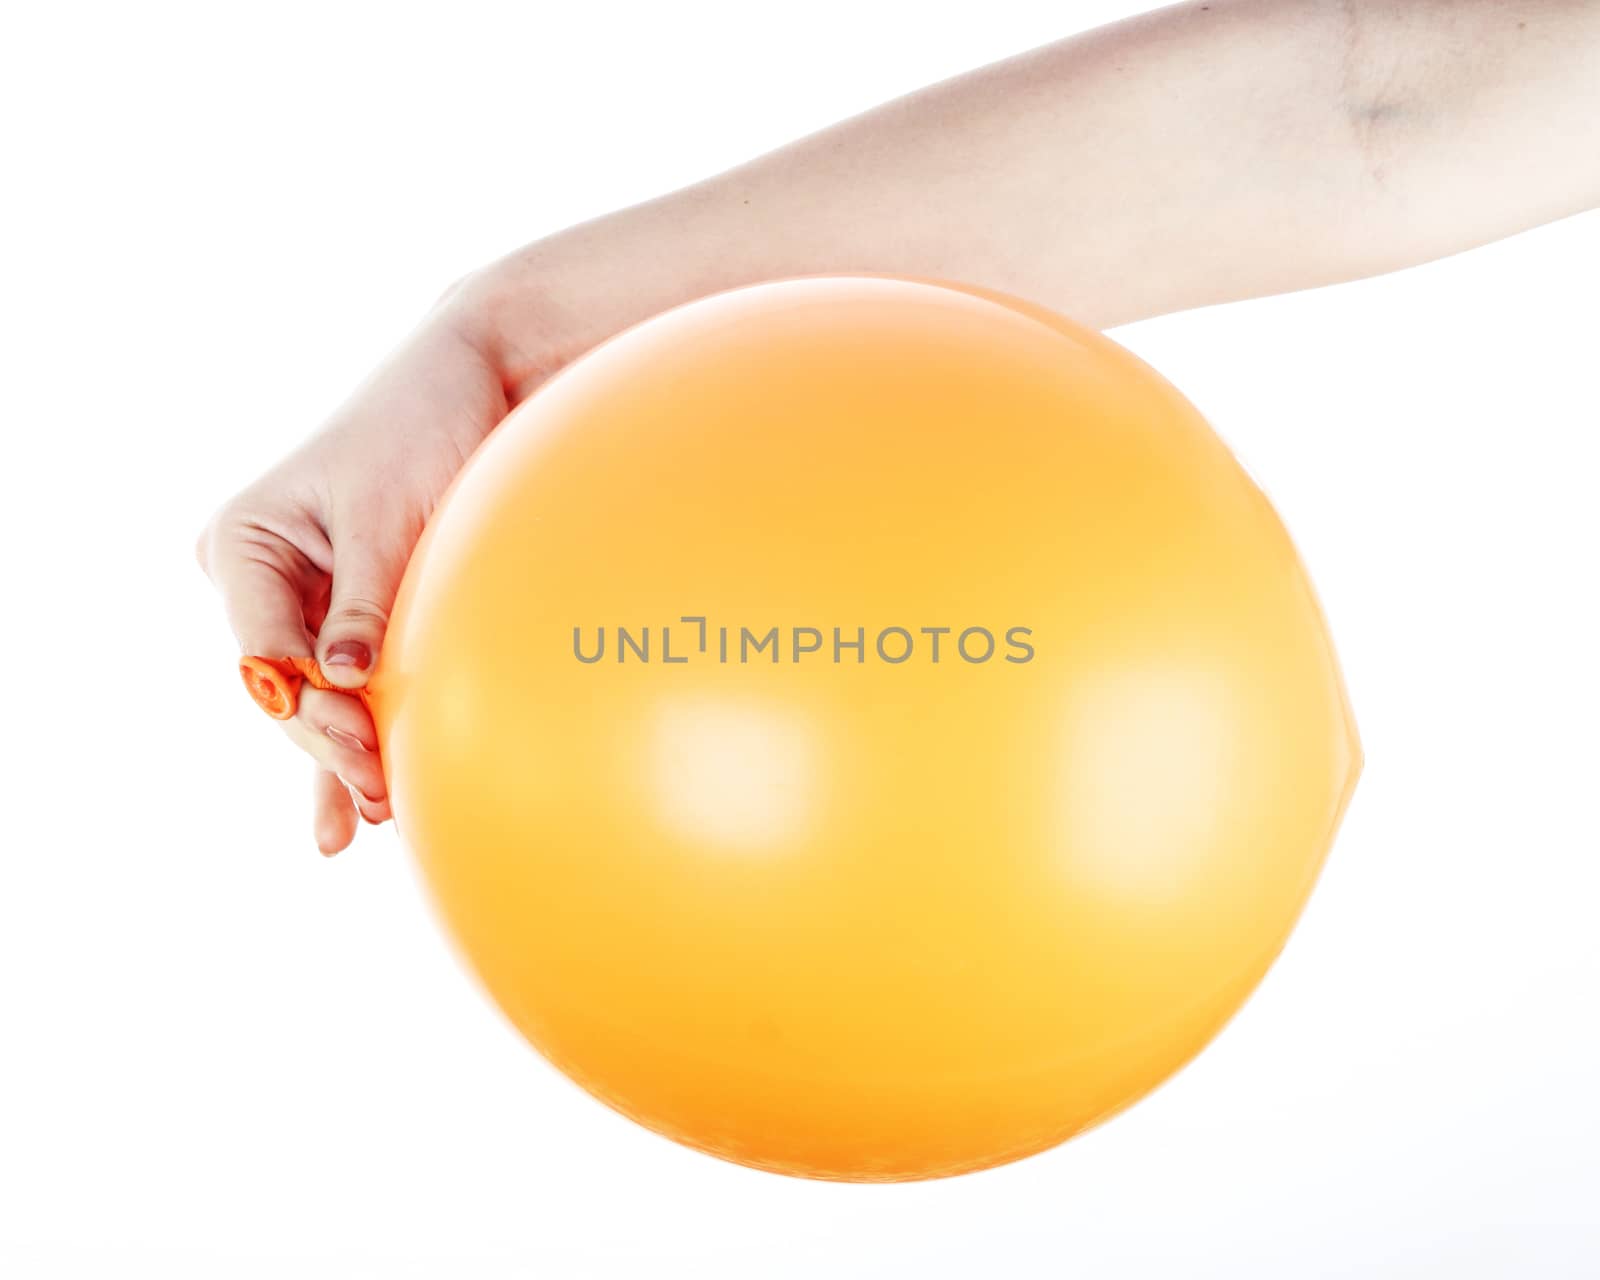 Ballon in a man's hand isolated.